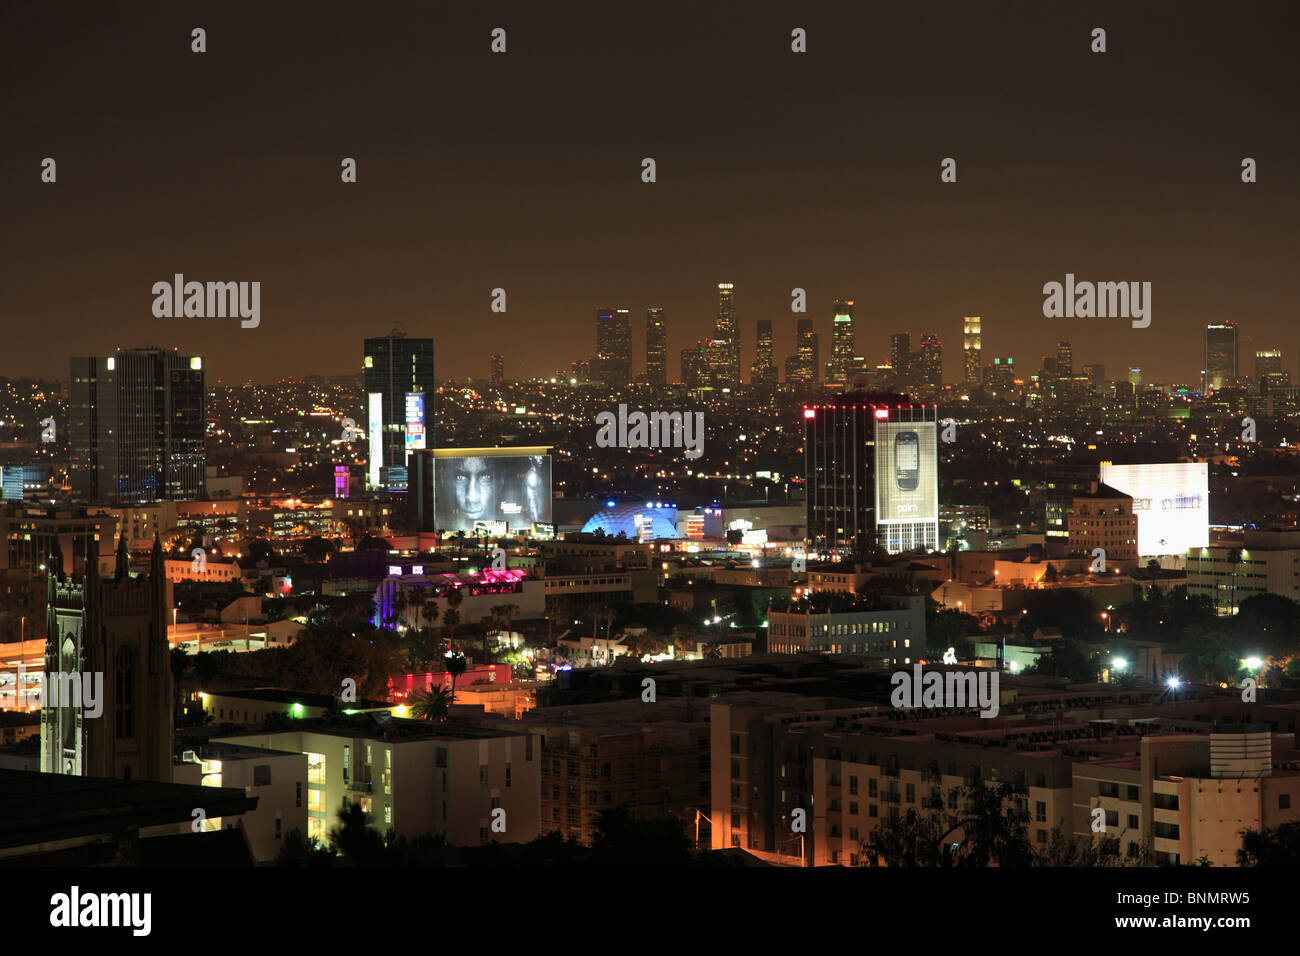 Holly Wood, Downtown Los Angeles bei Nacht, Los Angeles, Kalifornien, USA Stockfoto